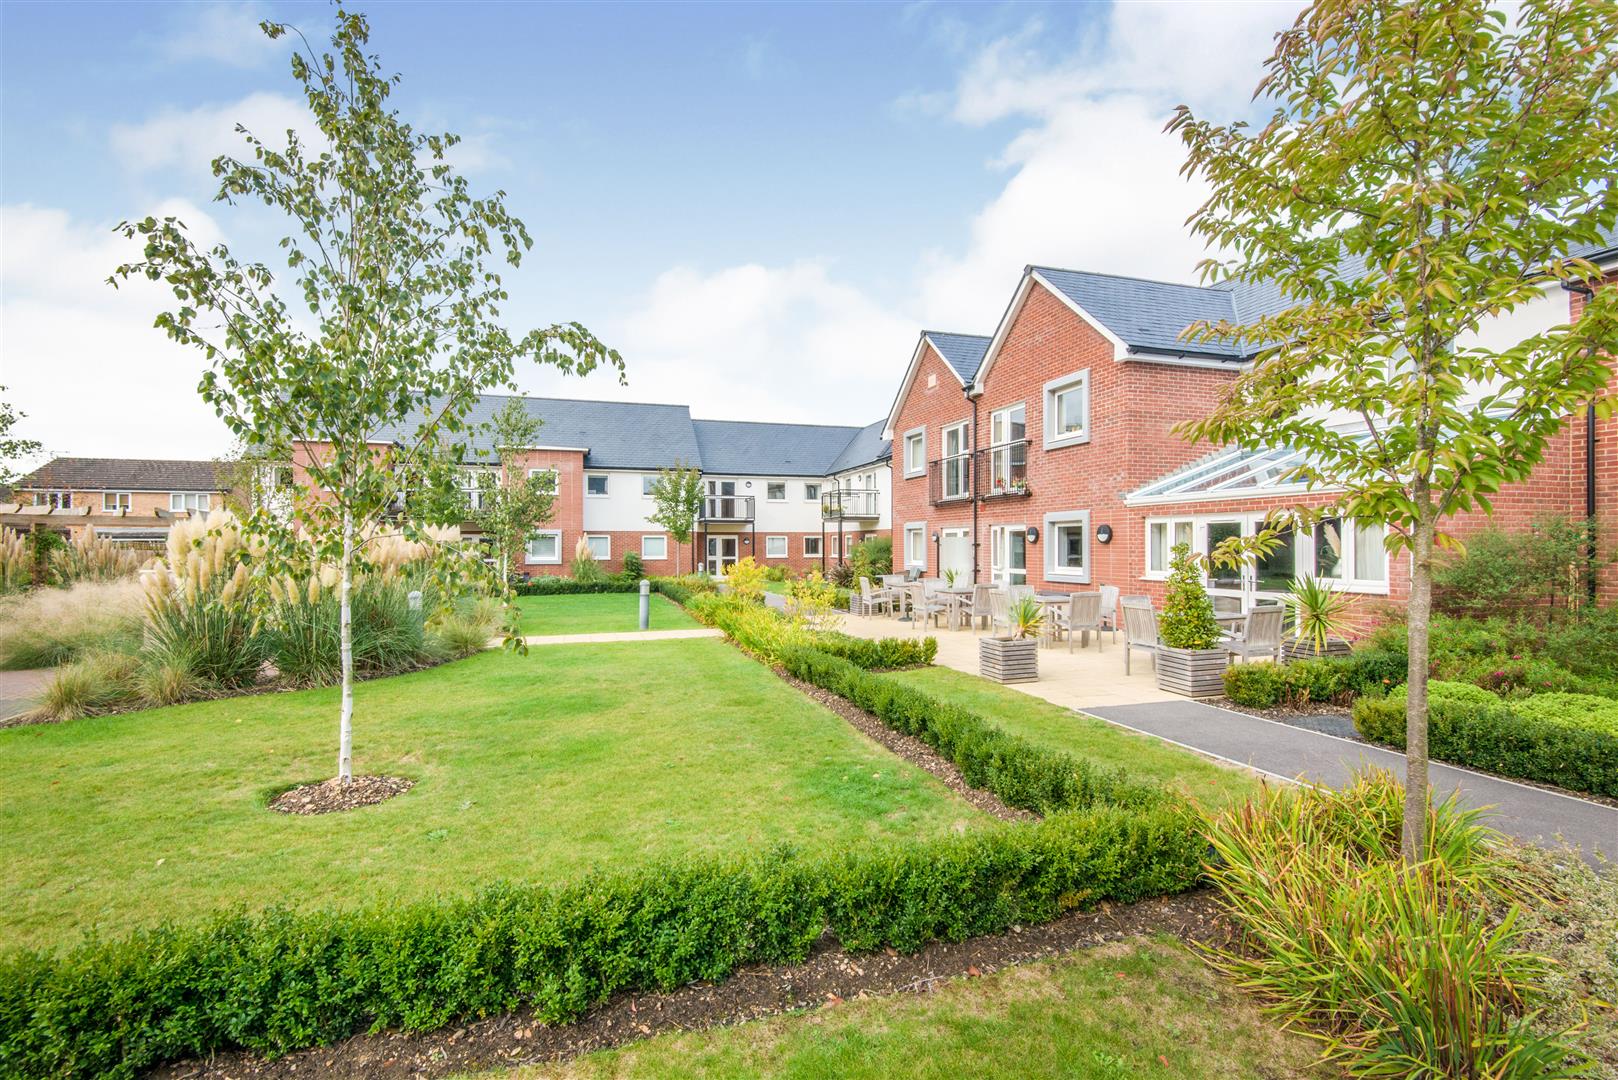 Hillier Court, Botley Road, Romsey, Hampshire, SO51 5AB